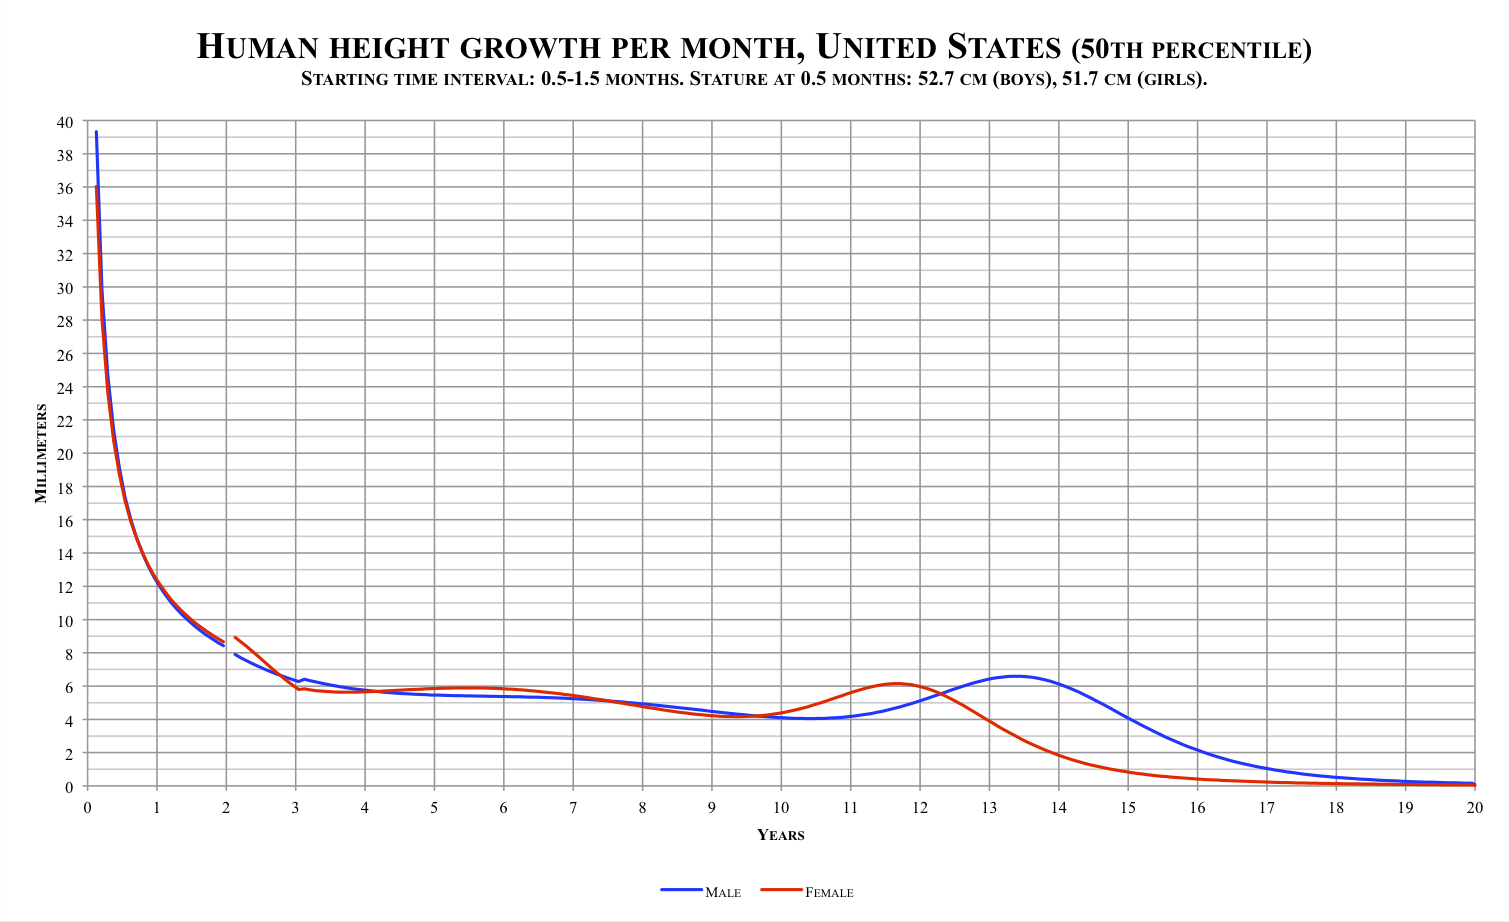 Human height growth per month, United States